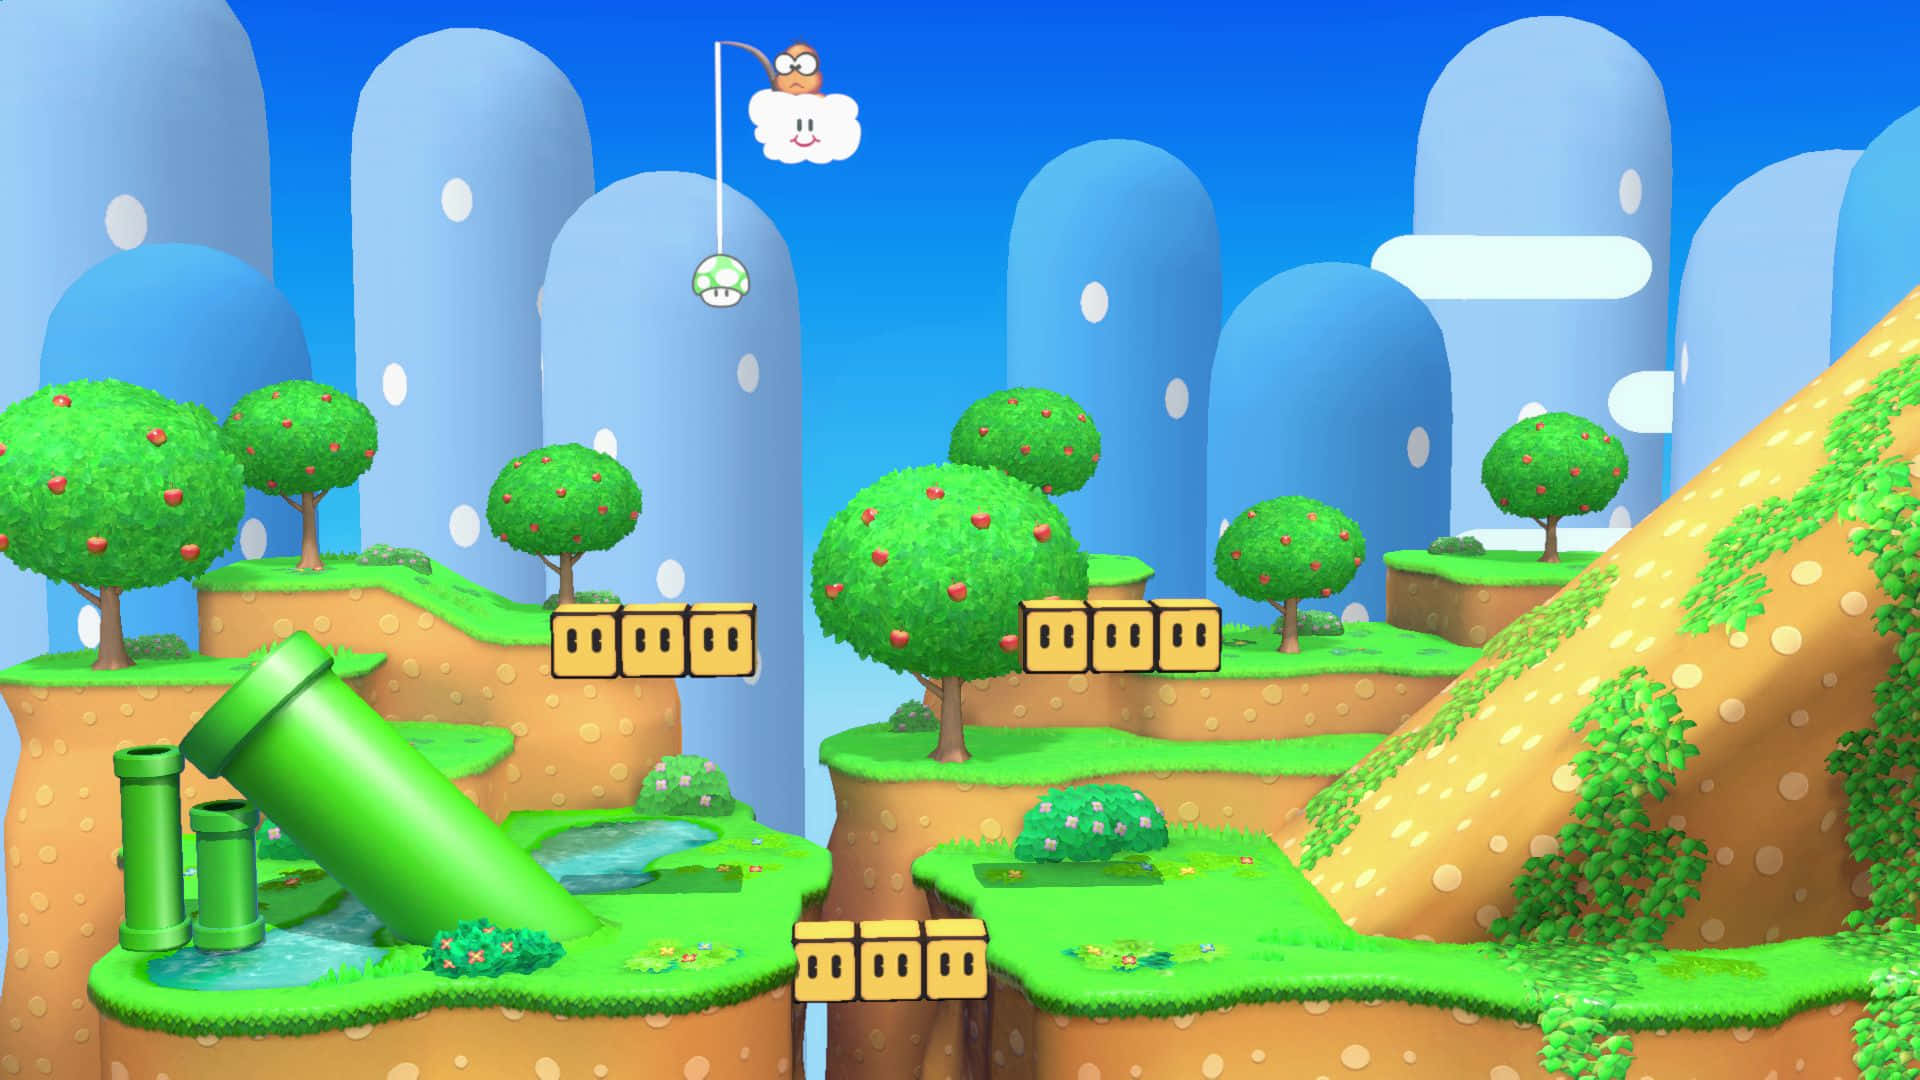 Jump into the Colorful Adventure with Super Mario World